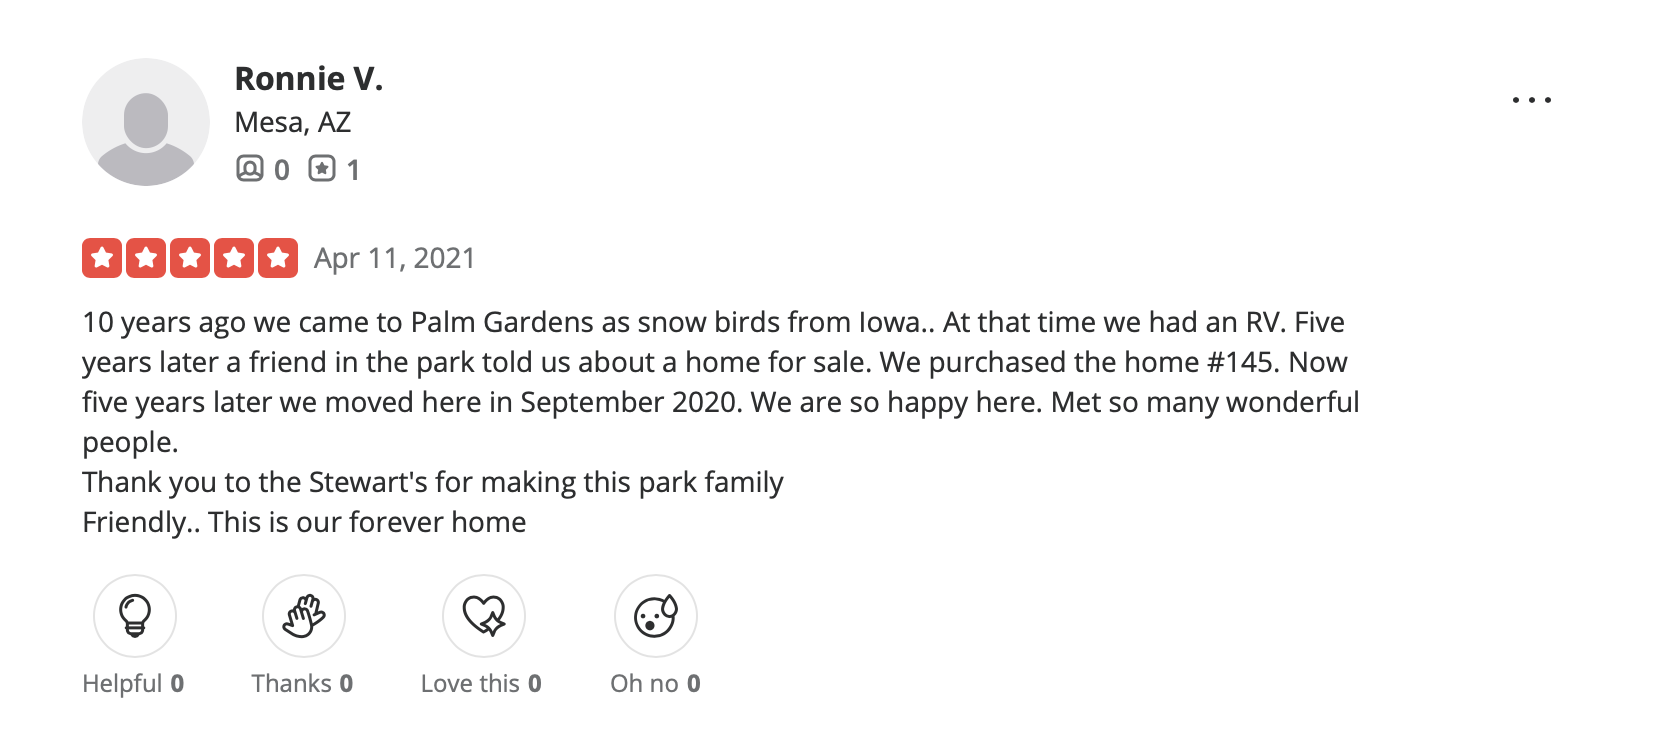 Another 5 star Yelp review of Palm Gardens RV Park Mesa, AZ